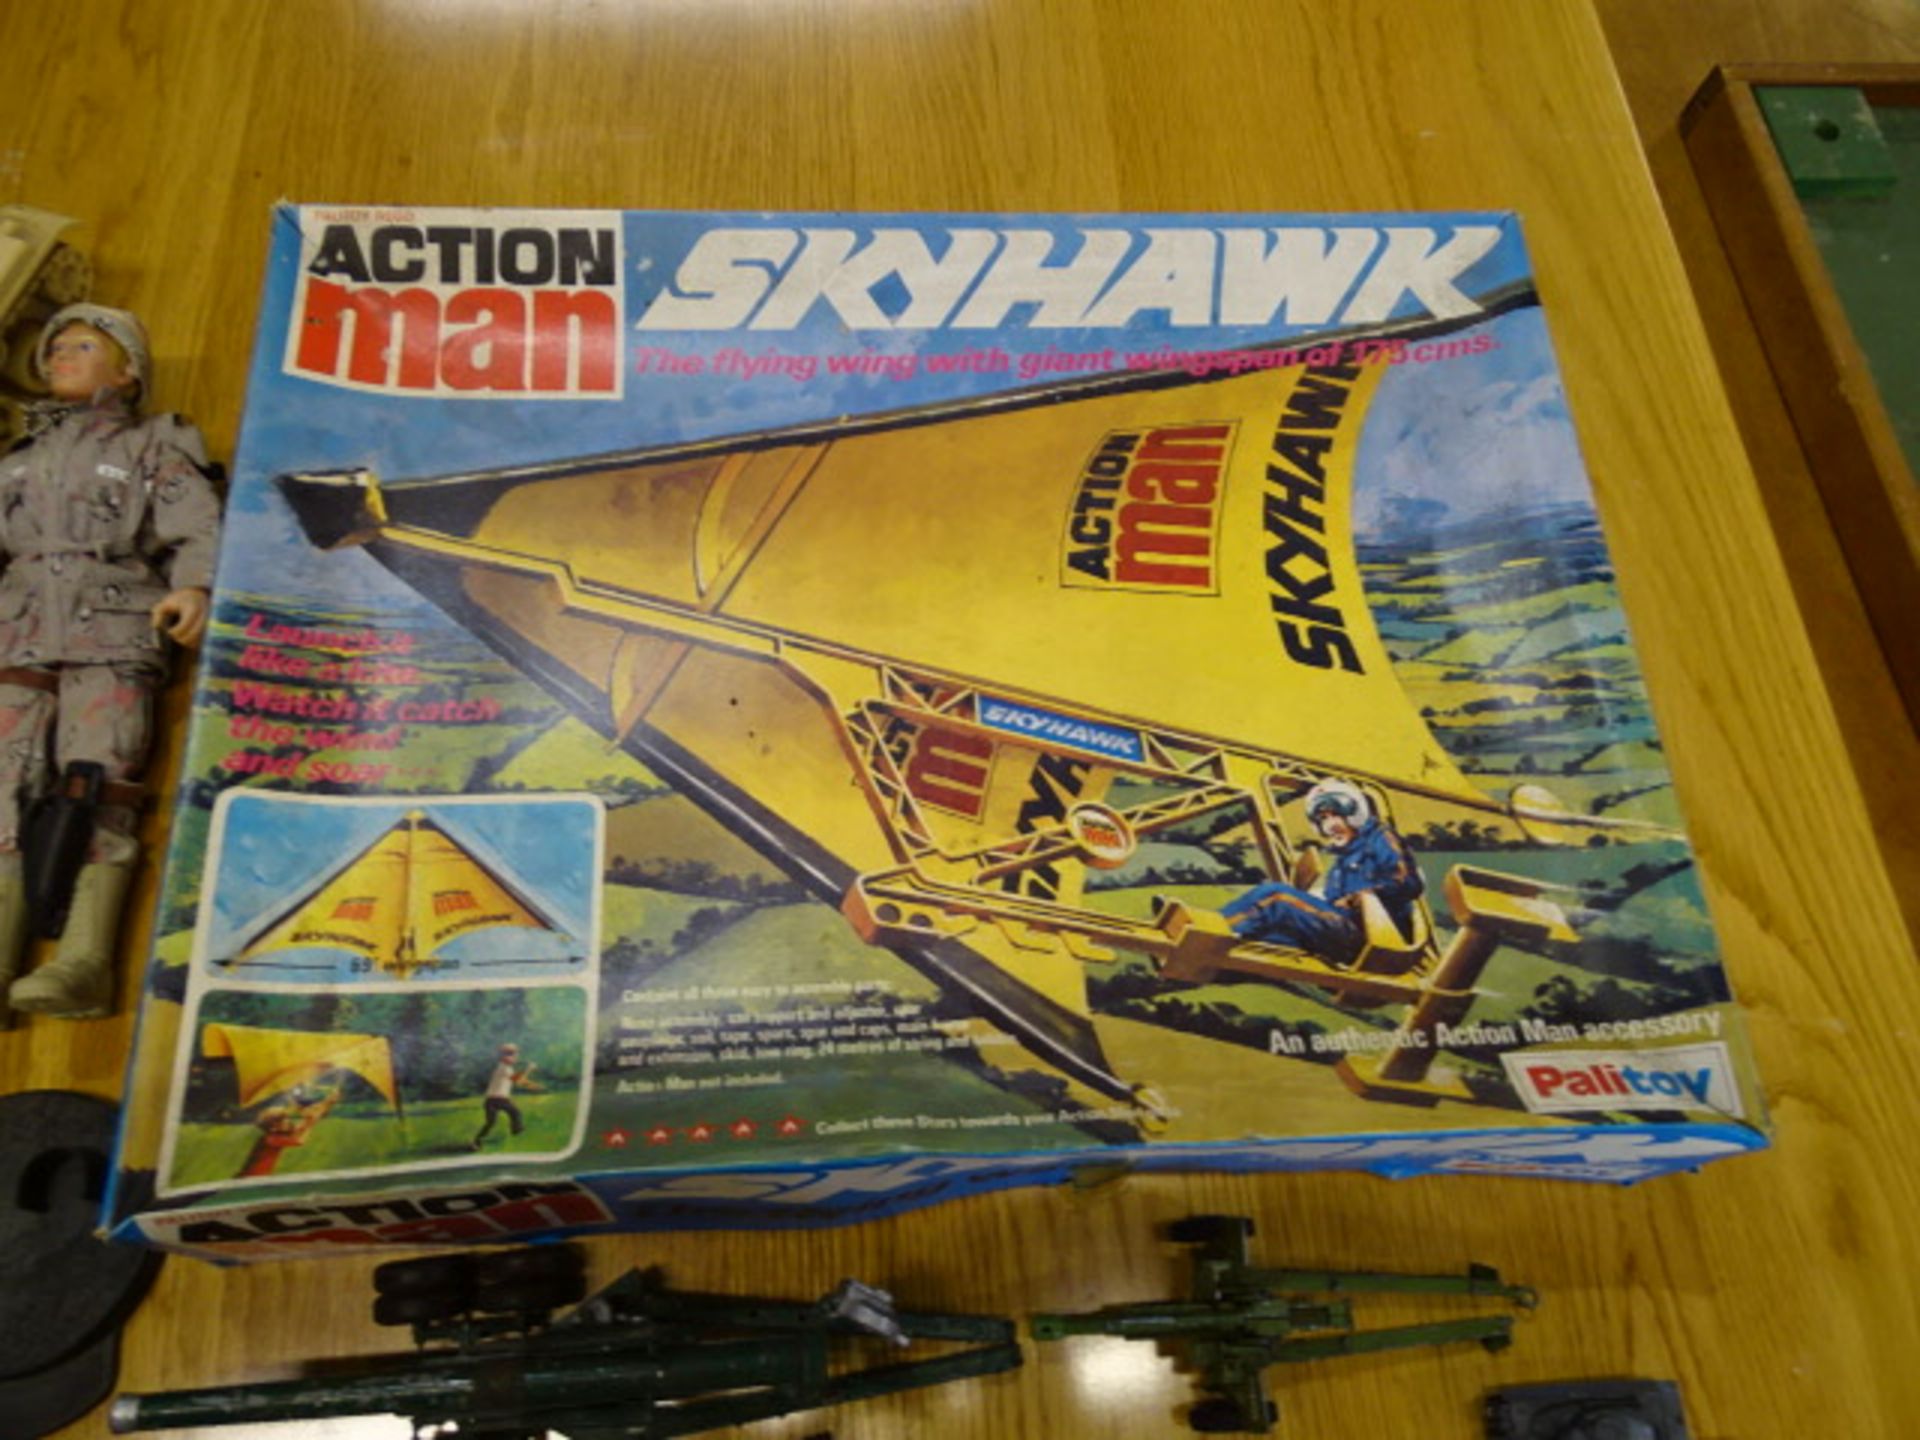 Vintage boxed Palitoy Action Man 'Skyhawk', G.I.JOE action figure and diecast cannons to include - Image 2 of 7